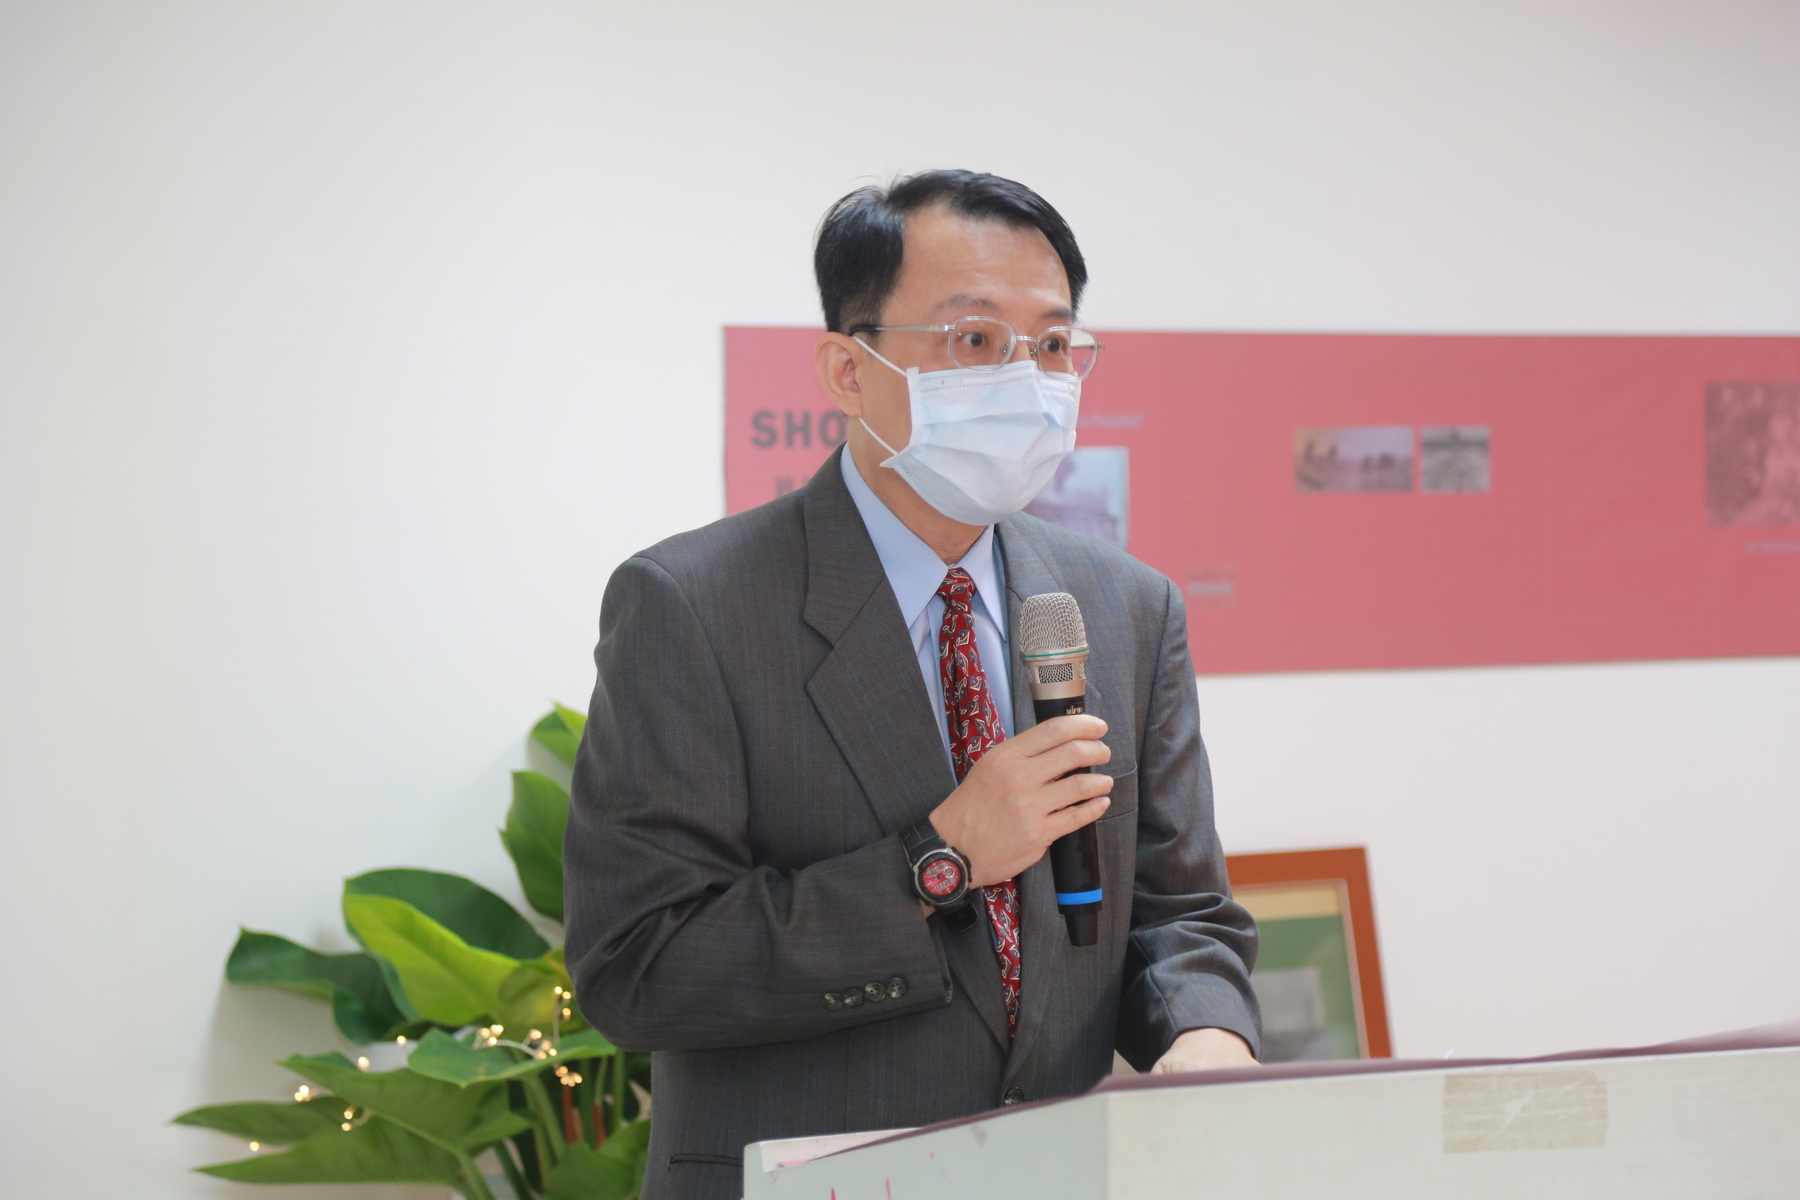 Vice President of the Office of Library and Information Services Wei-Kuang Lai delivered an opening speech